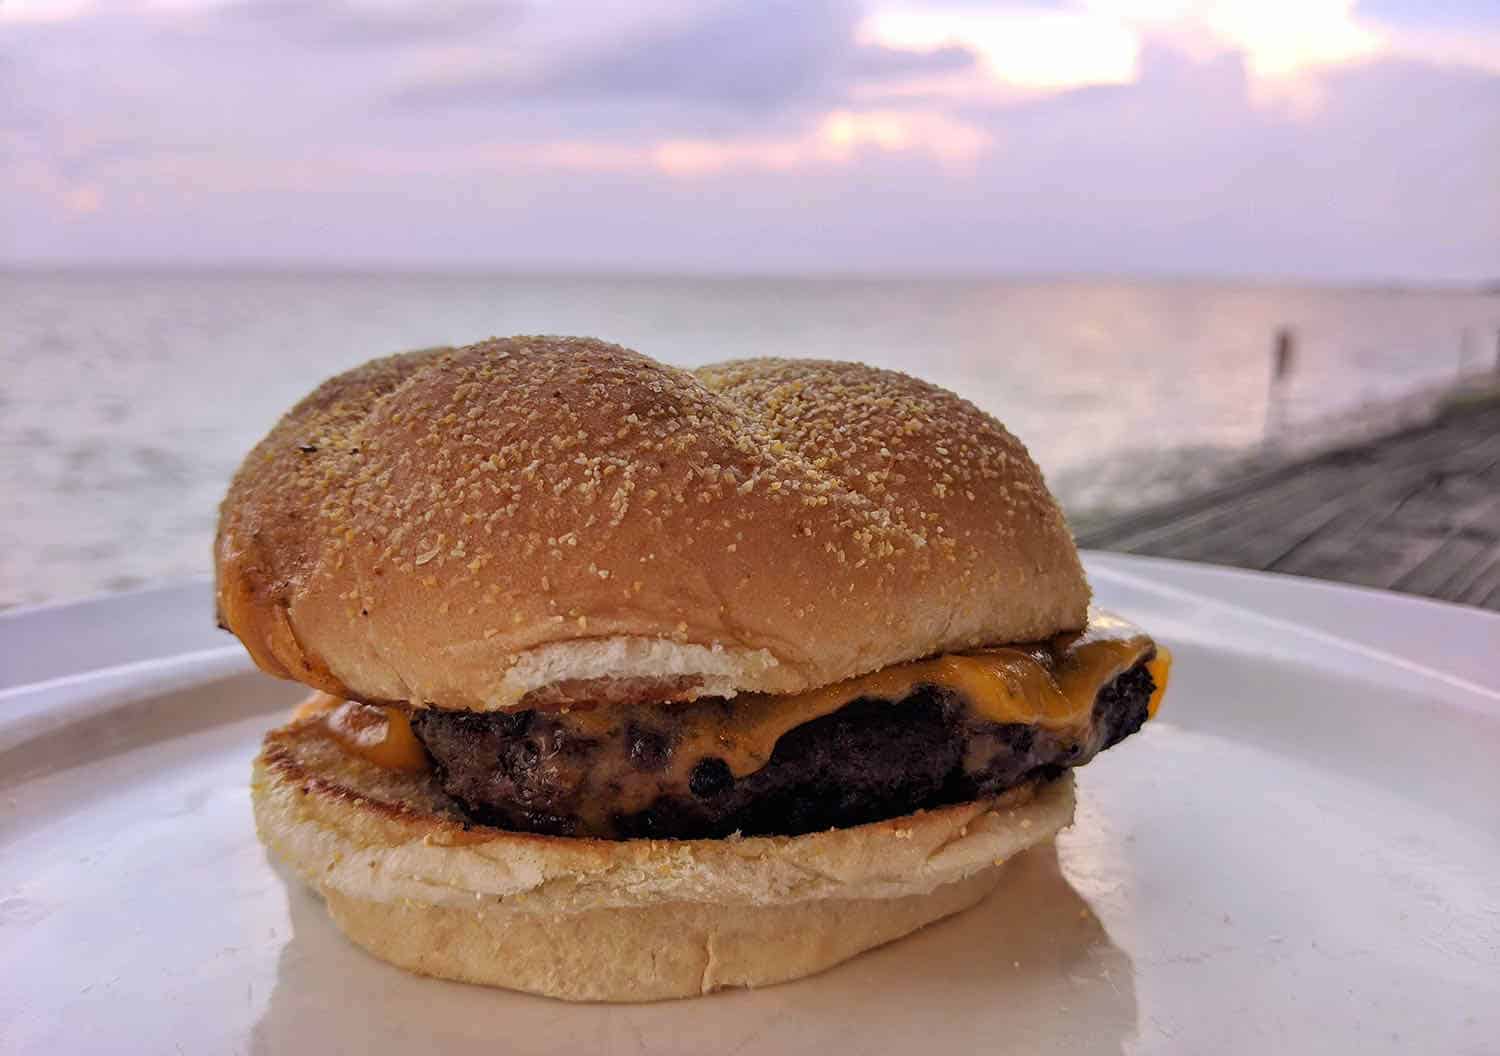 Hamburger on a plate with ocean in the background